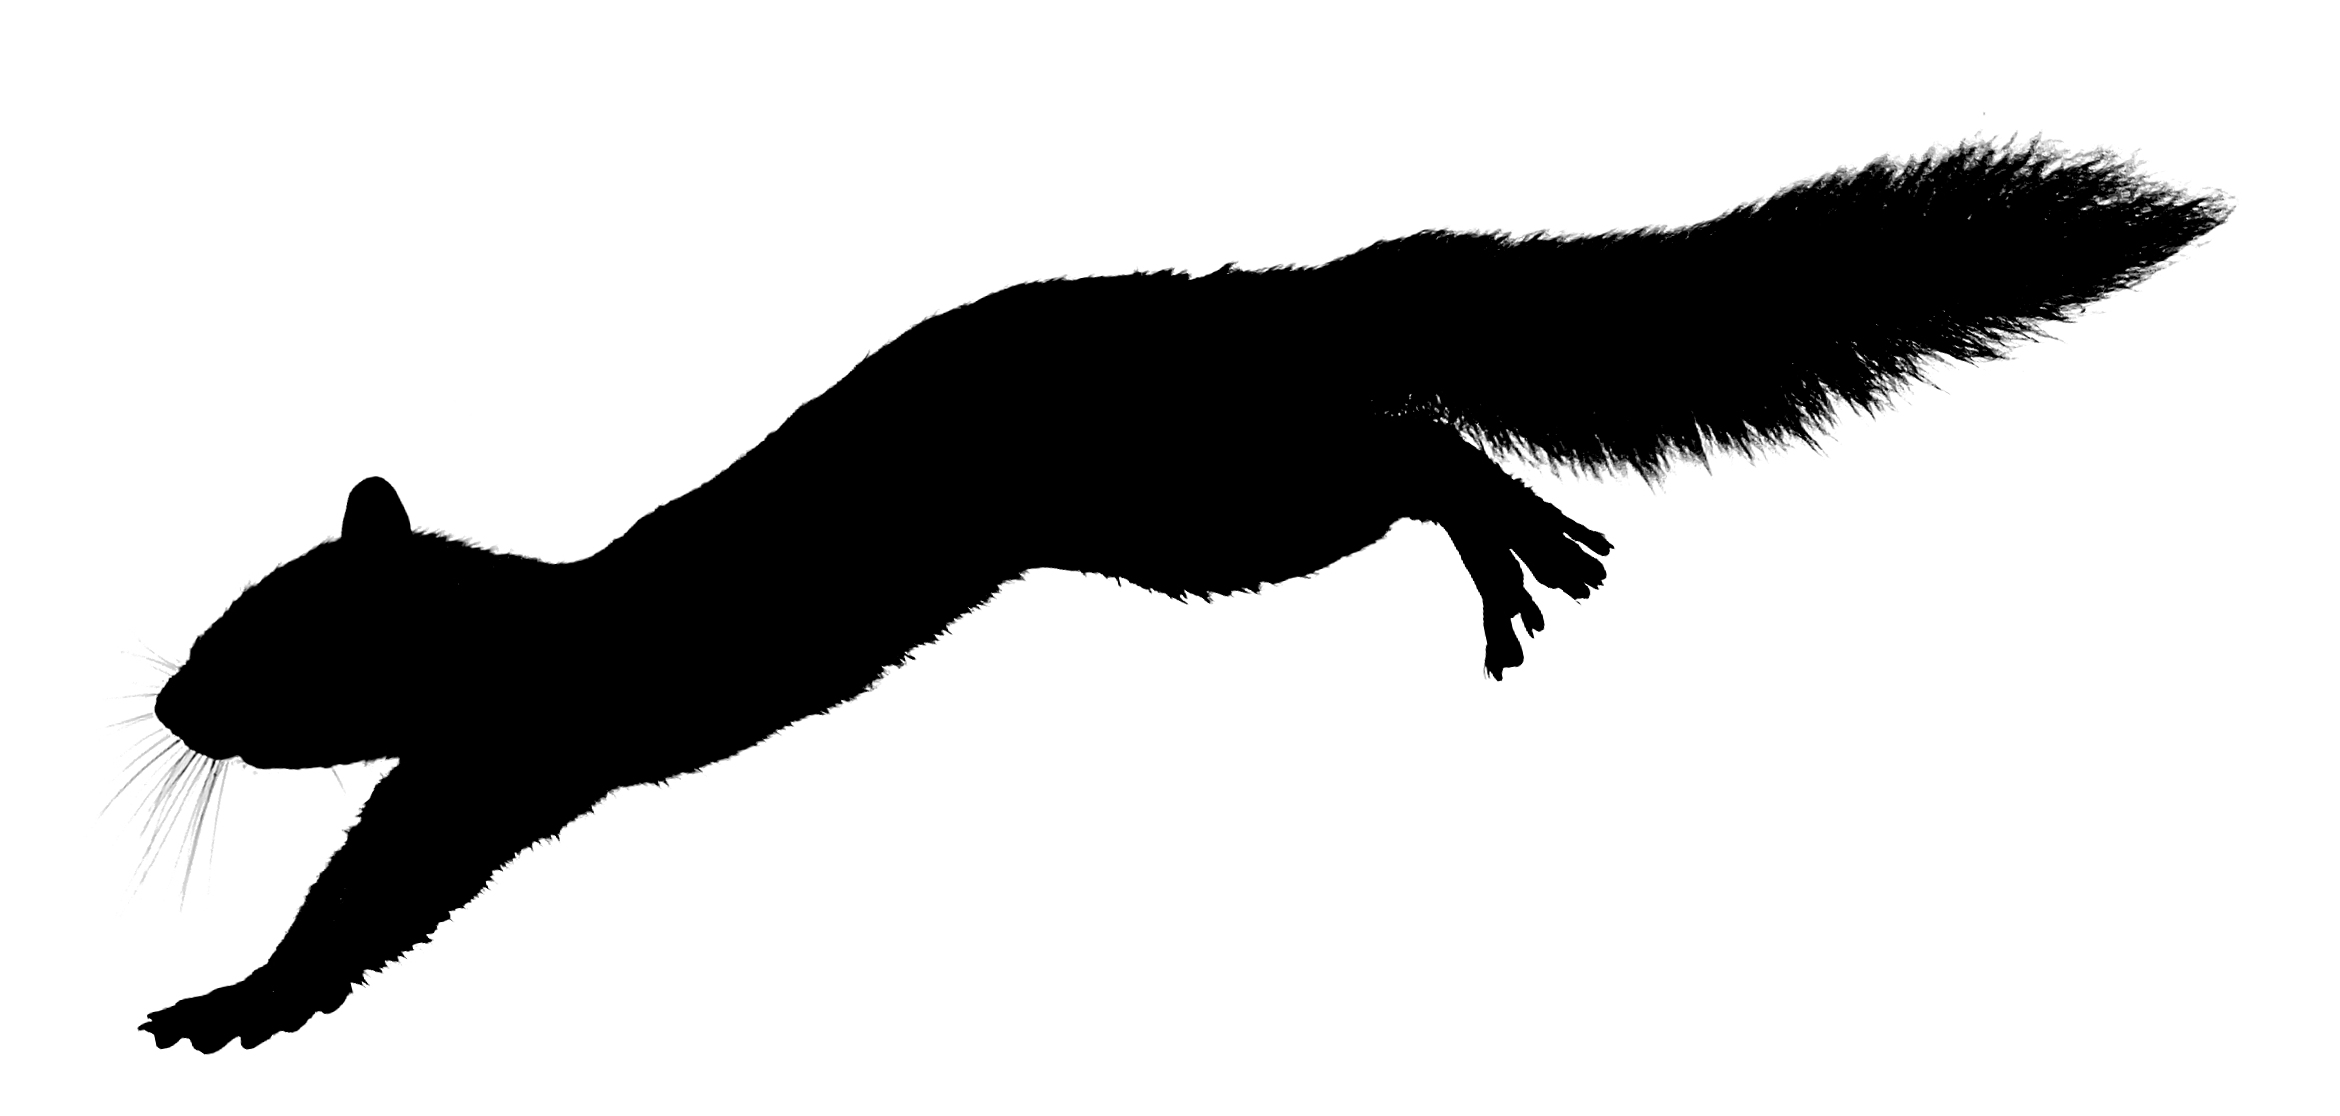 Leaping Squirrel Silhouette   Flickr   Photo Sharing